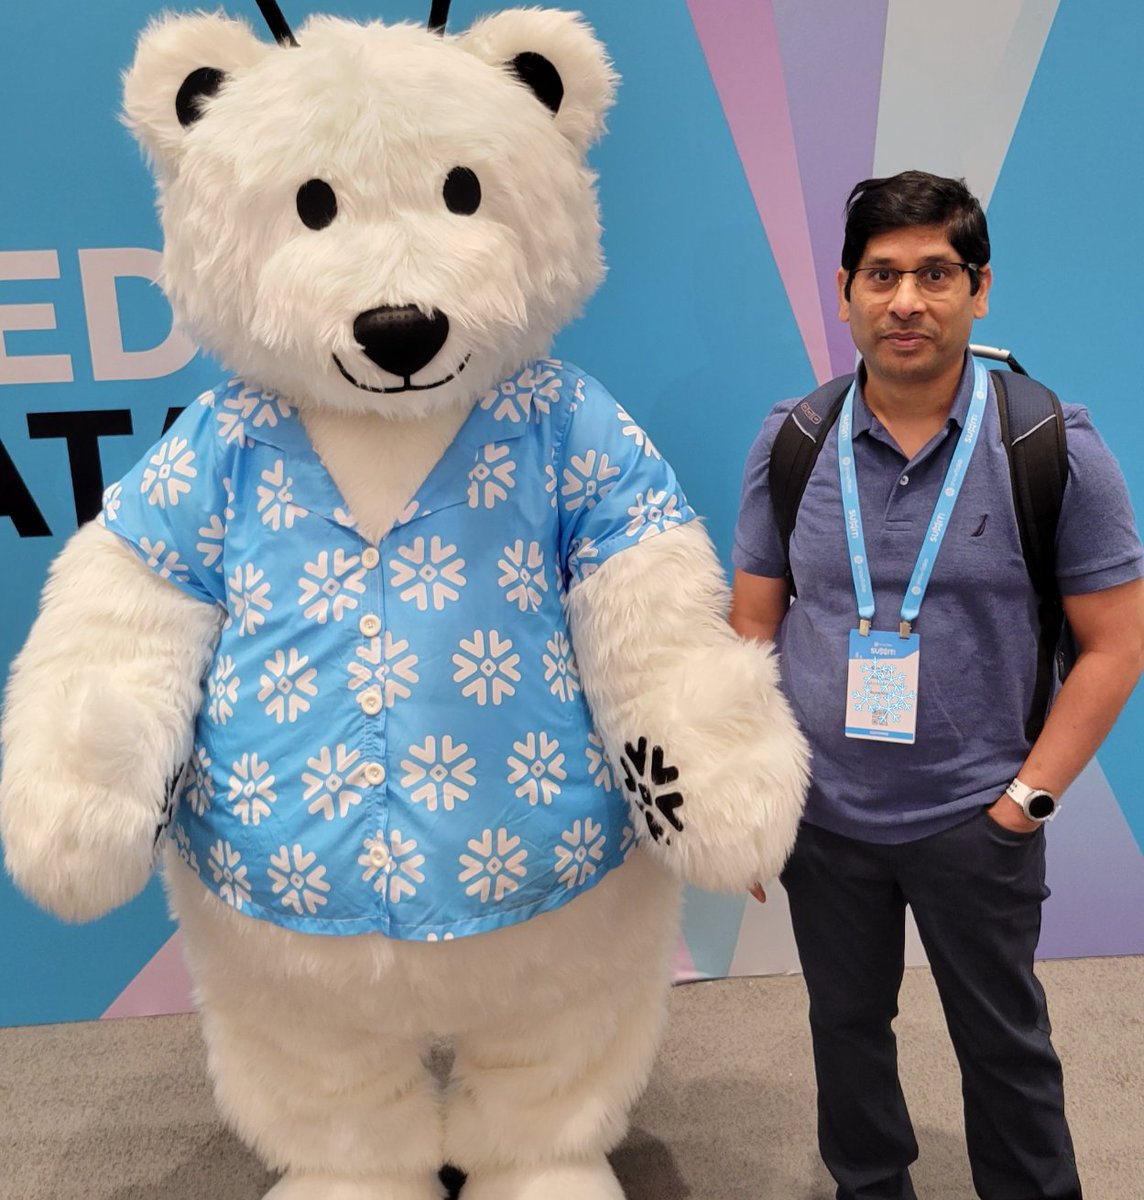 If you want to look thin, stand next to snow bear 😋

#SnowflakeSummit
#DataAISummit